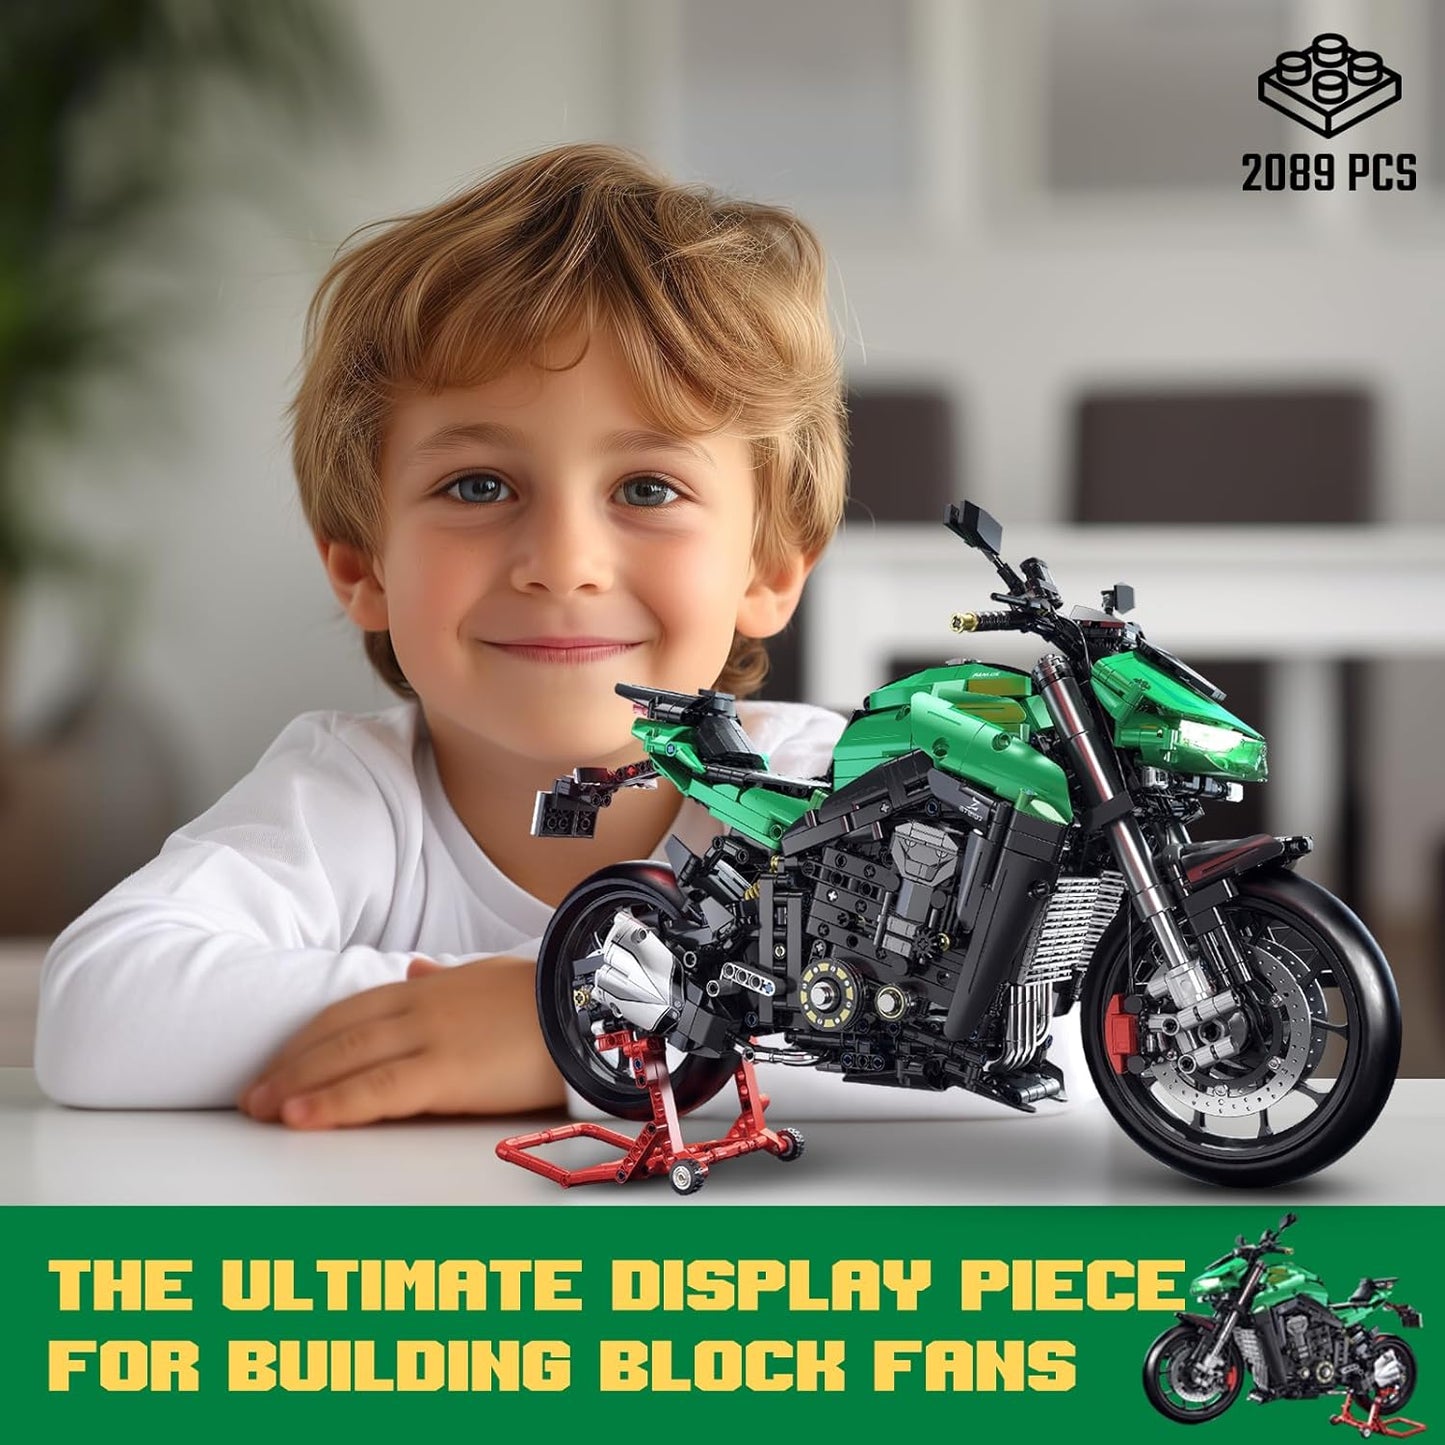 1:5 Motorcycle Model Building Bricks Sets - 2090+ PCS Large Motorcycle Building Blocks Kit with Light - Display Model Toy Gift Idea for Adults Boys